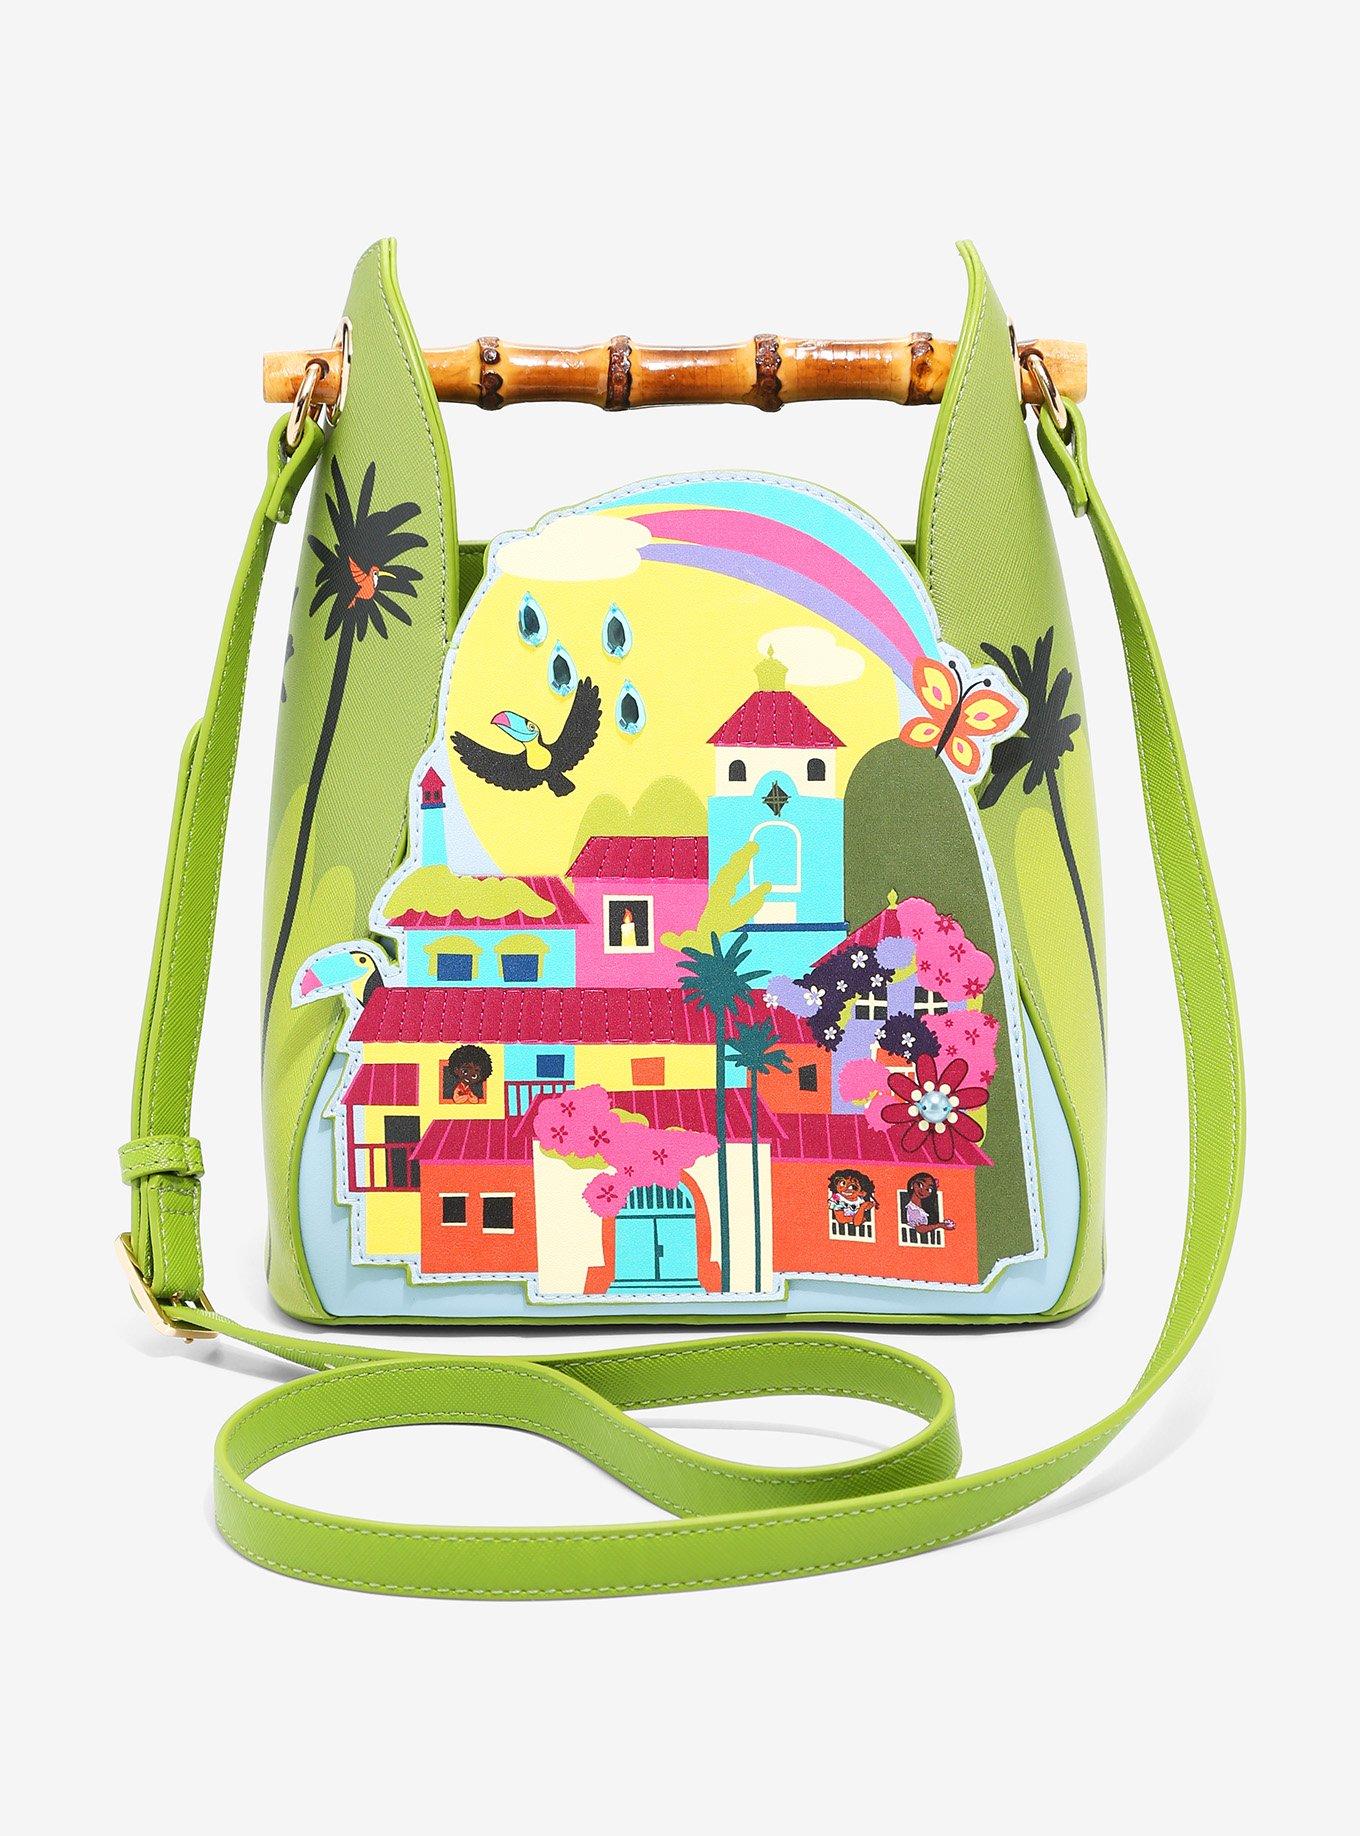 Encanto Create Your Own Bags (8)